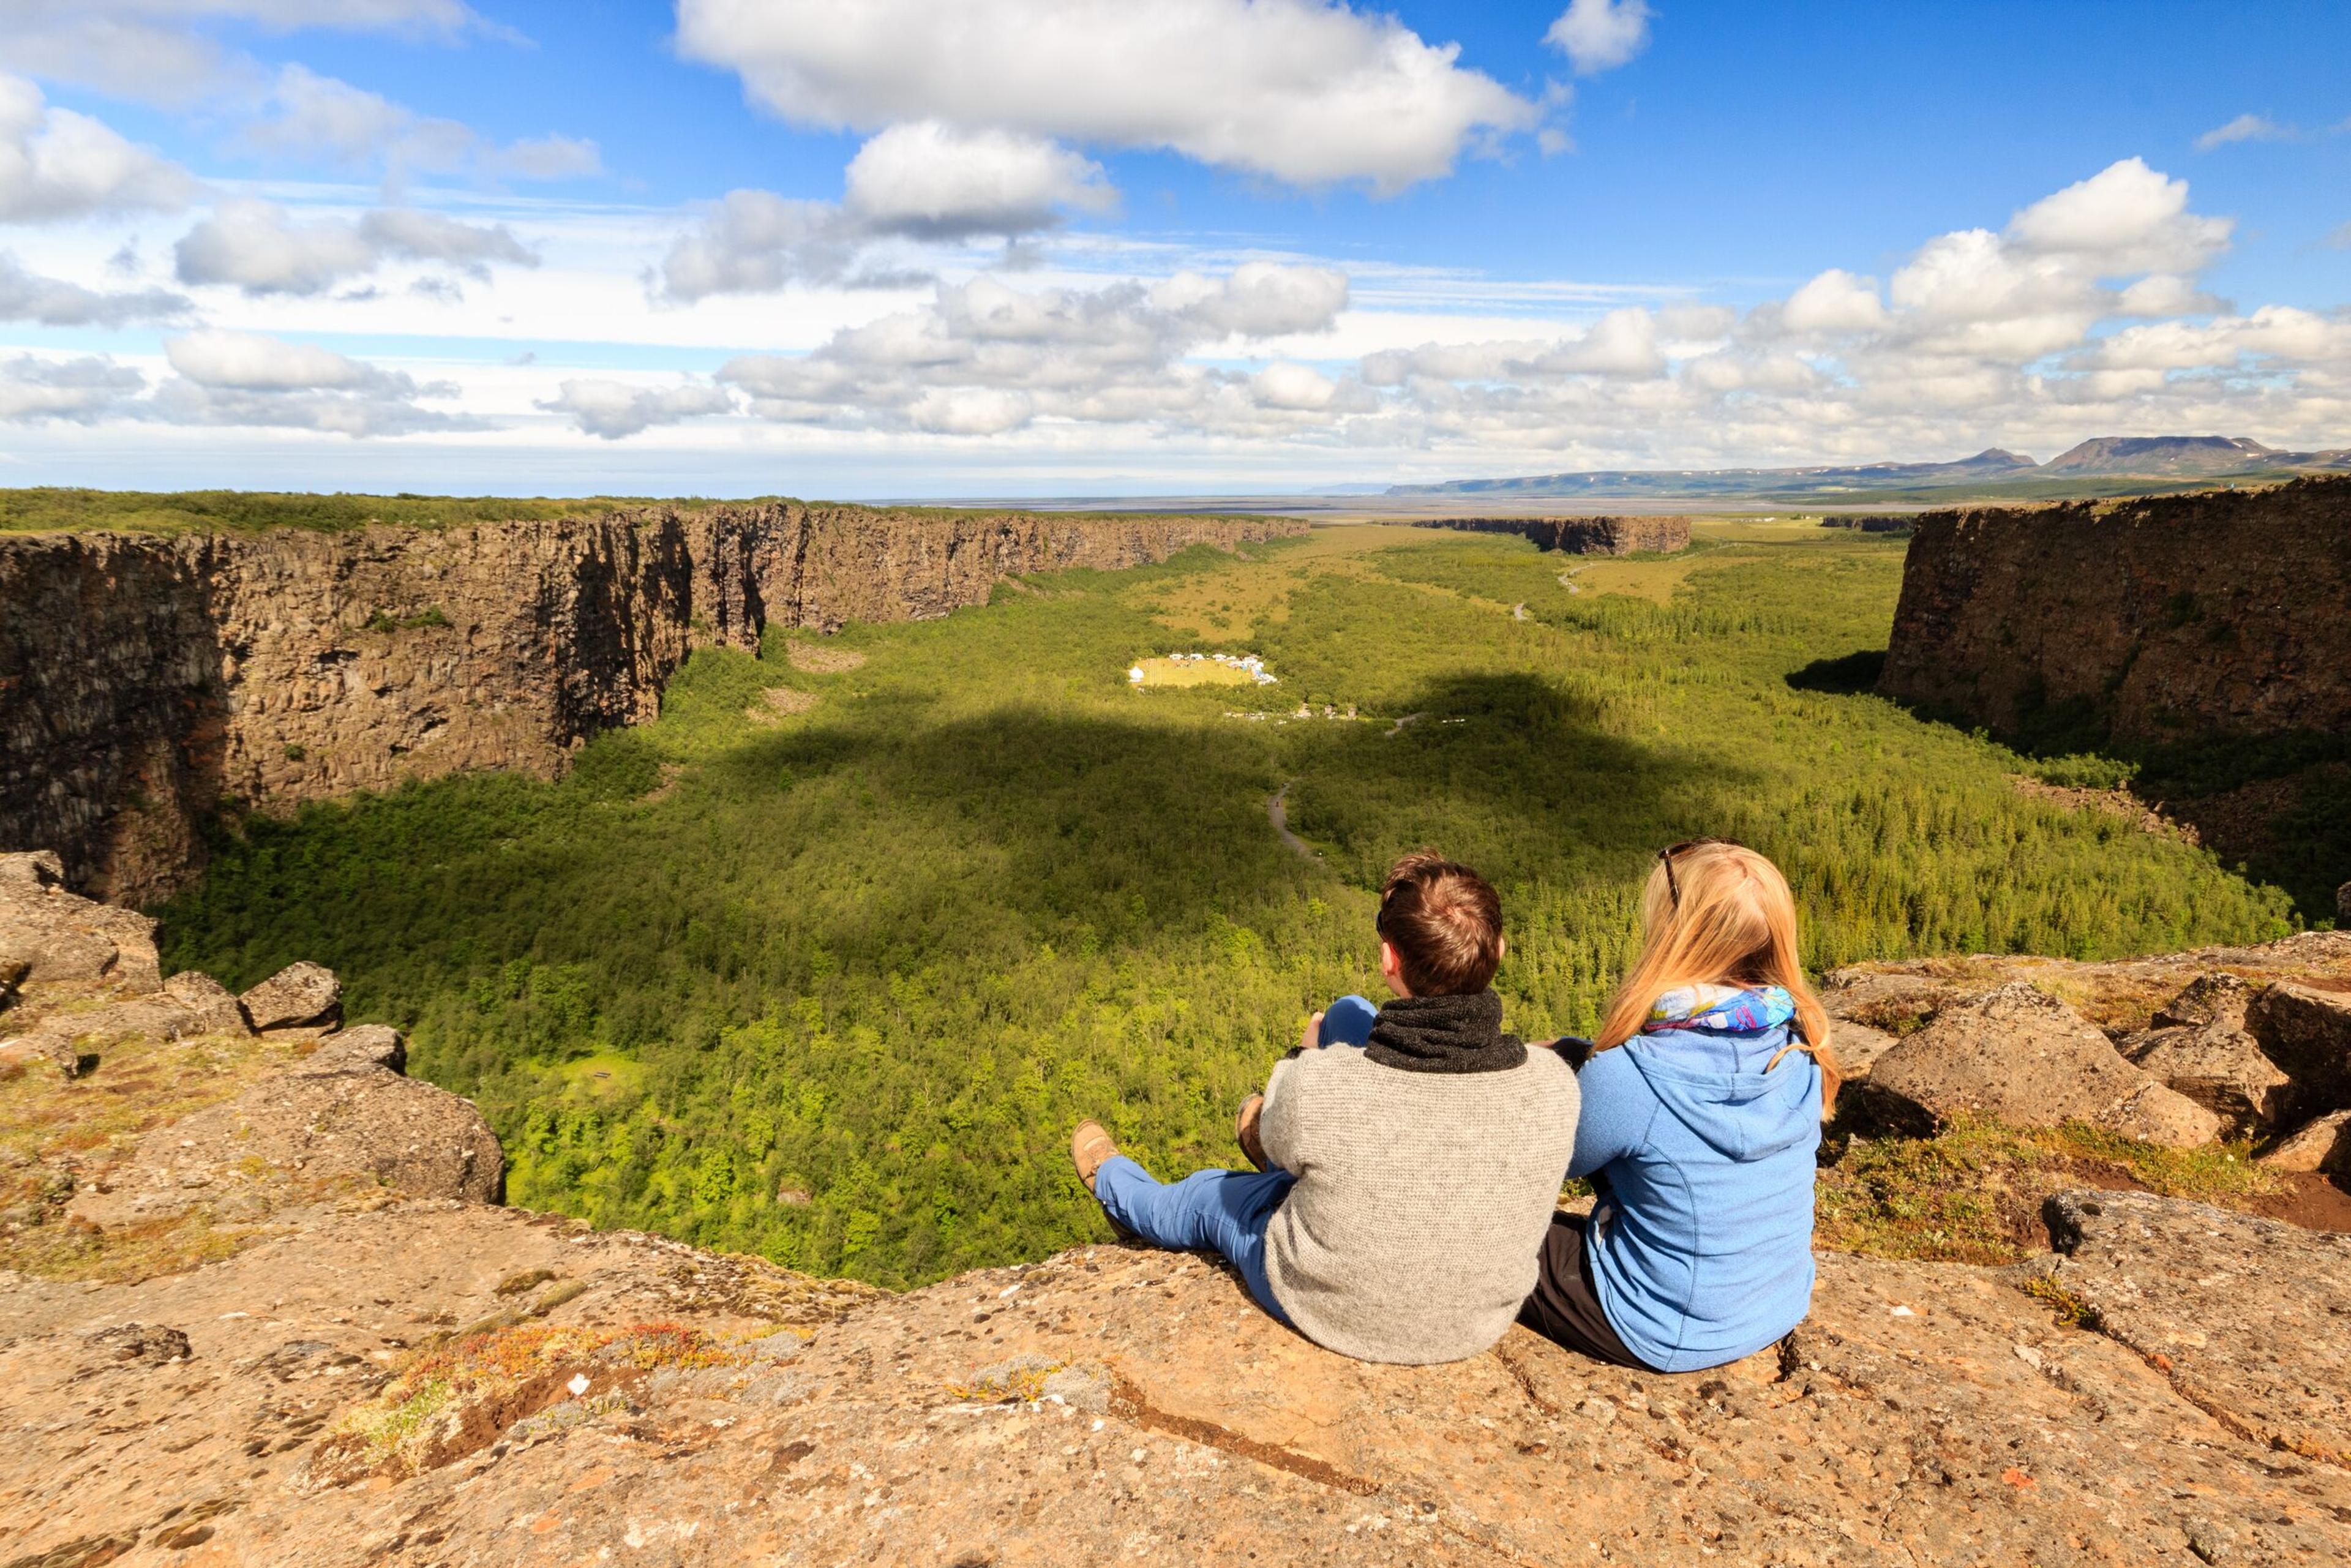 A couple sitting on the edge of a cliff overlooking the lush, horseshoe-shaped Ásbyrgi Canyon in Iceland, with dense green vegetation below and a clear blue sky above.